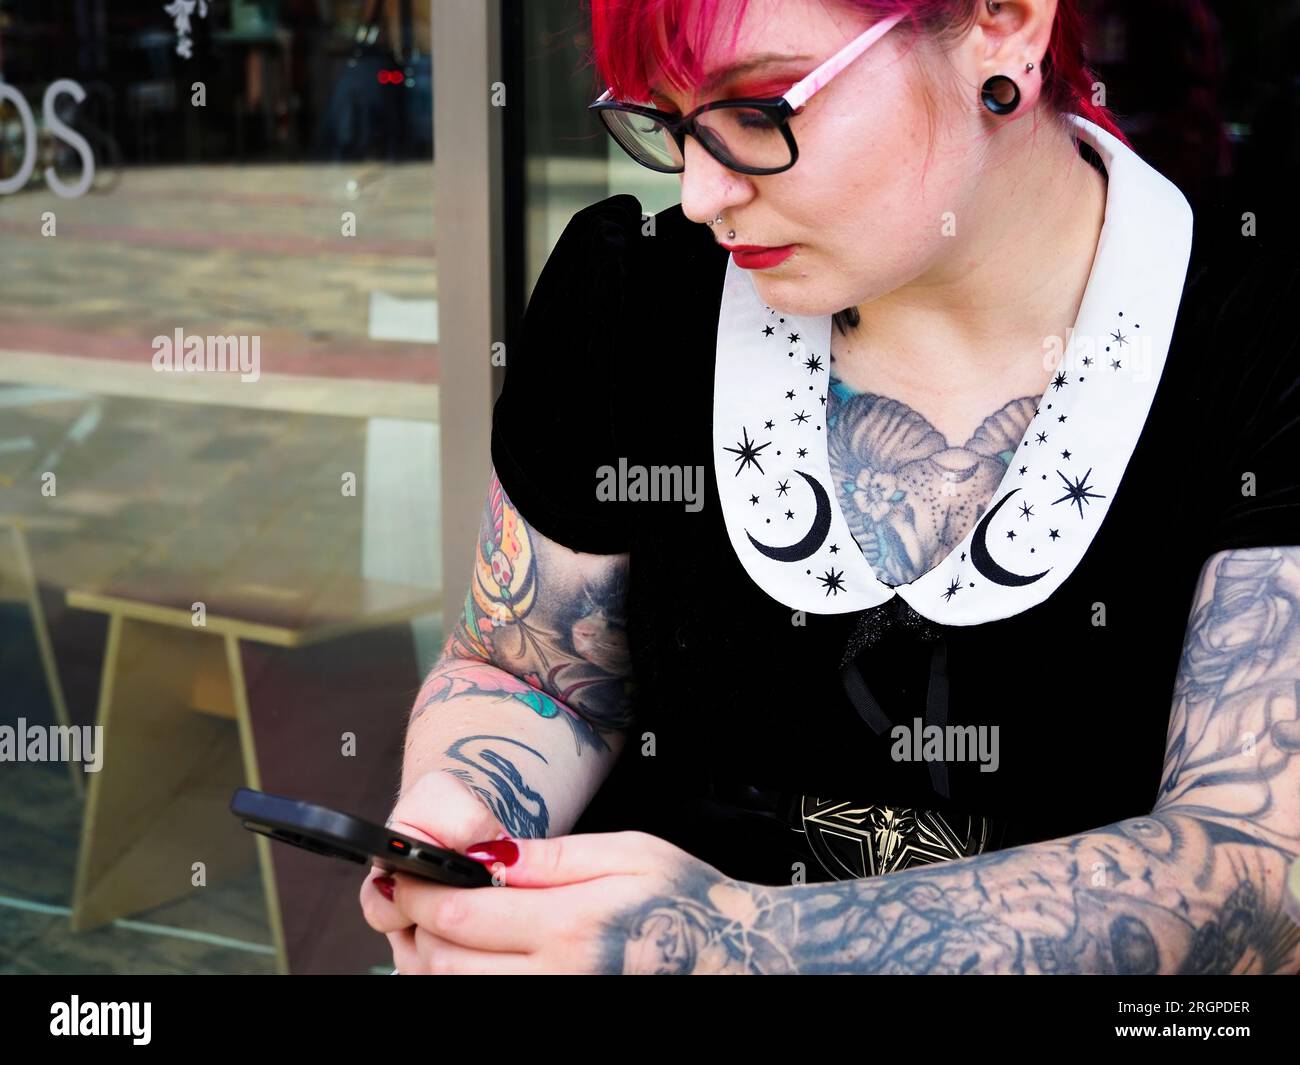 Woman in her mid twenties with dyed red hair and tattoos wearing glasses using a smartphone in Leeds West Yorkshire England Stock Photo